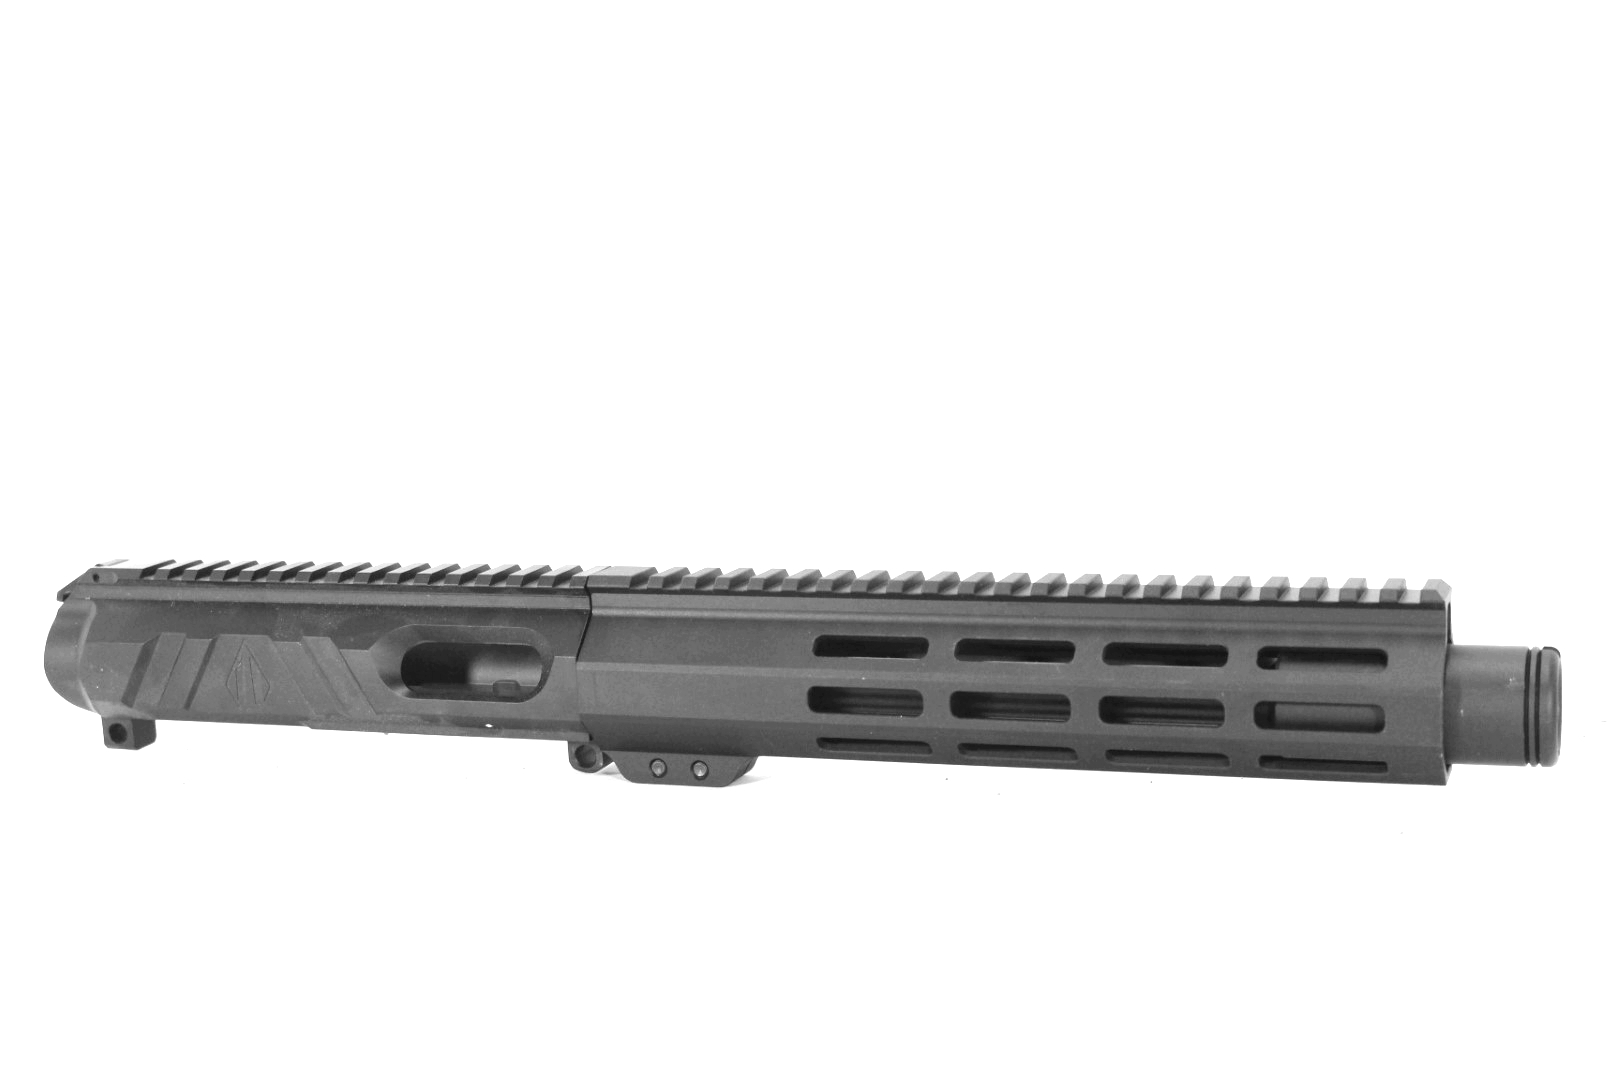 8 inch AR-15 Non Reciprocating Side Charging 9mm Upper with Flash Can